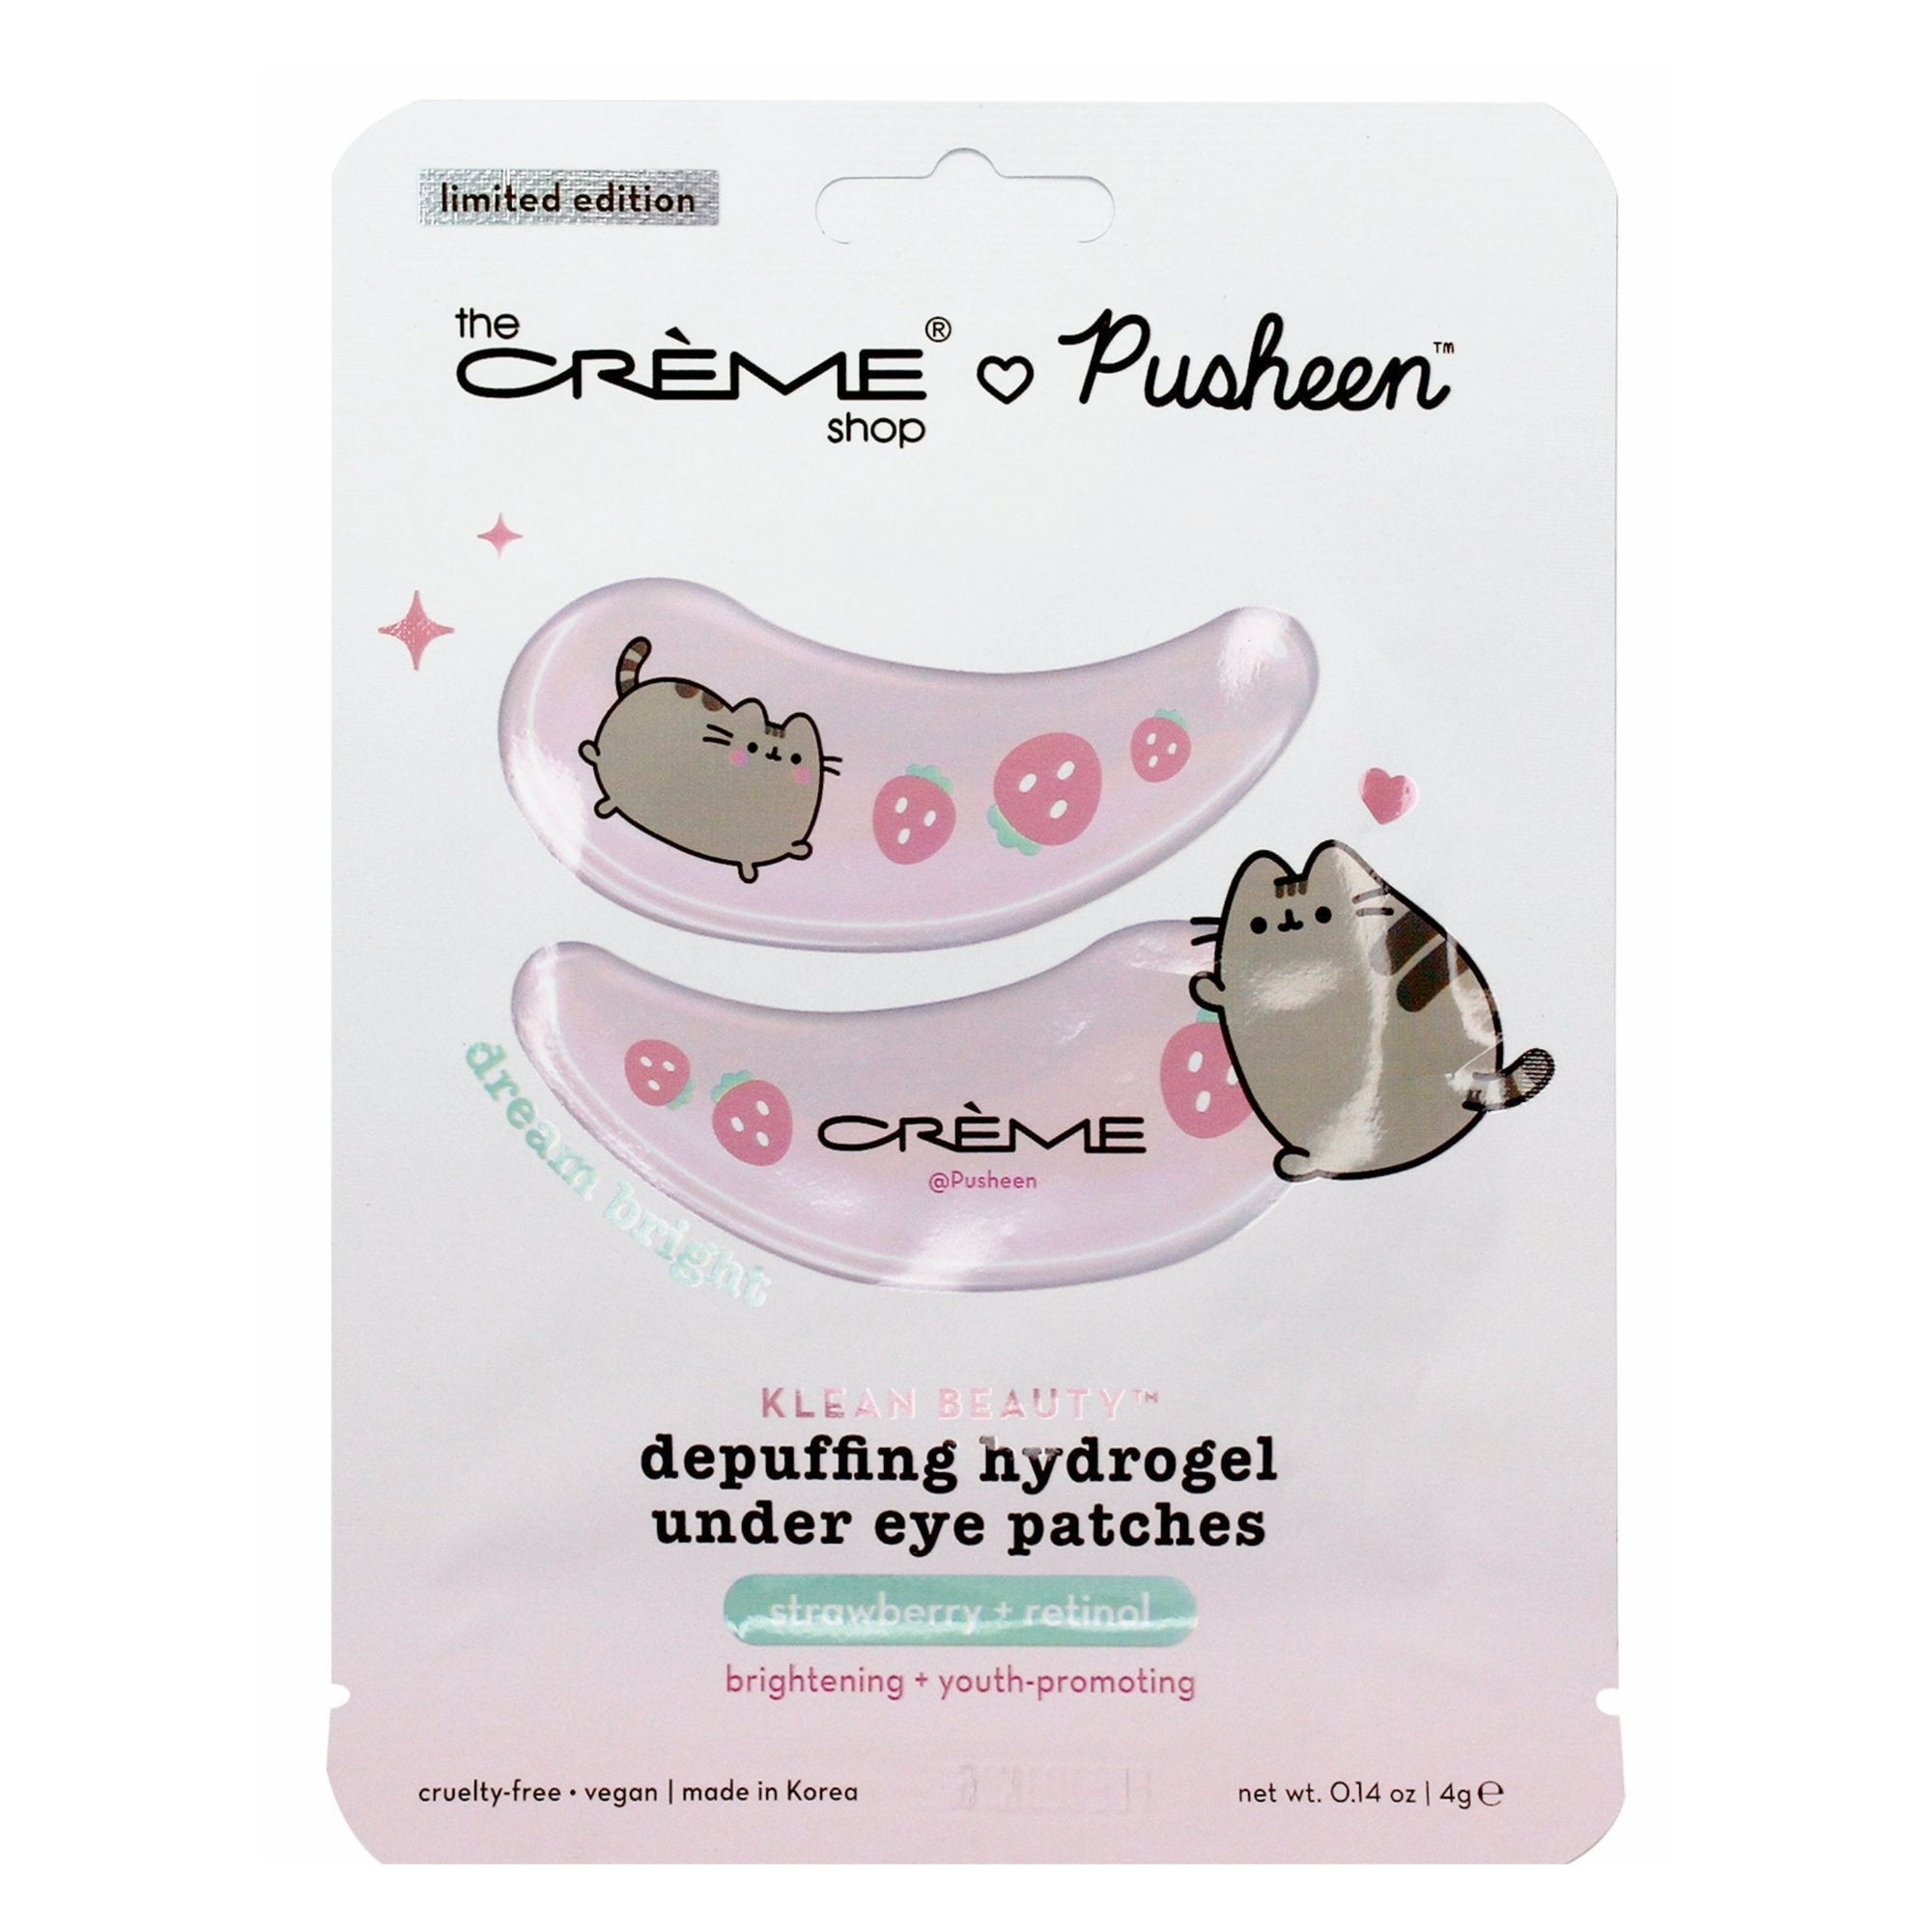 Pusheen Dream Bright Depuffing Hydrogel Under Eye Patches Under Eye Patches The Crème Shop x Pusheen 